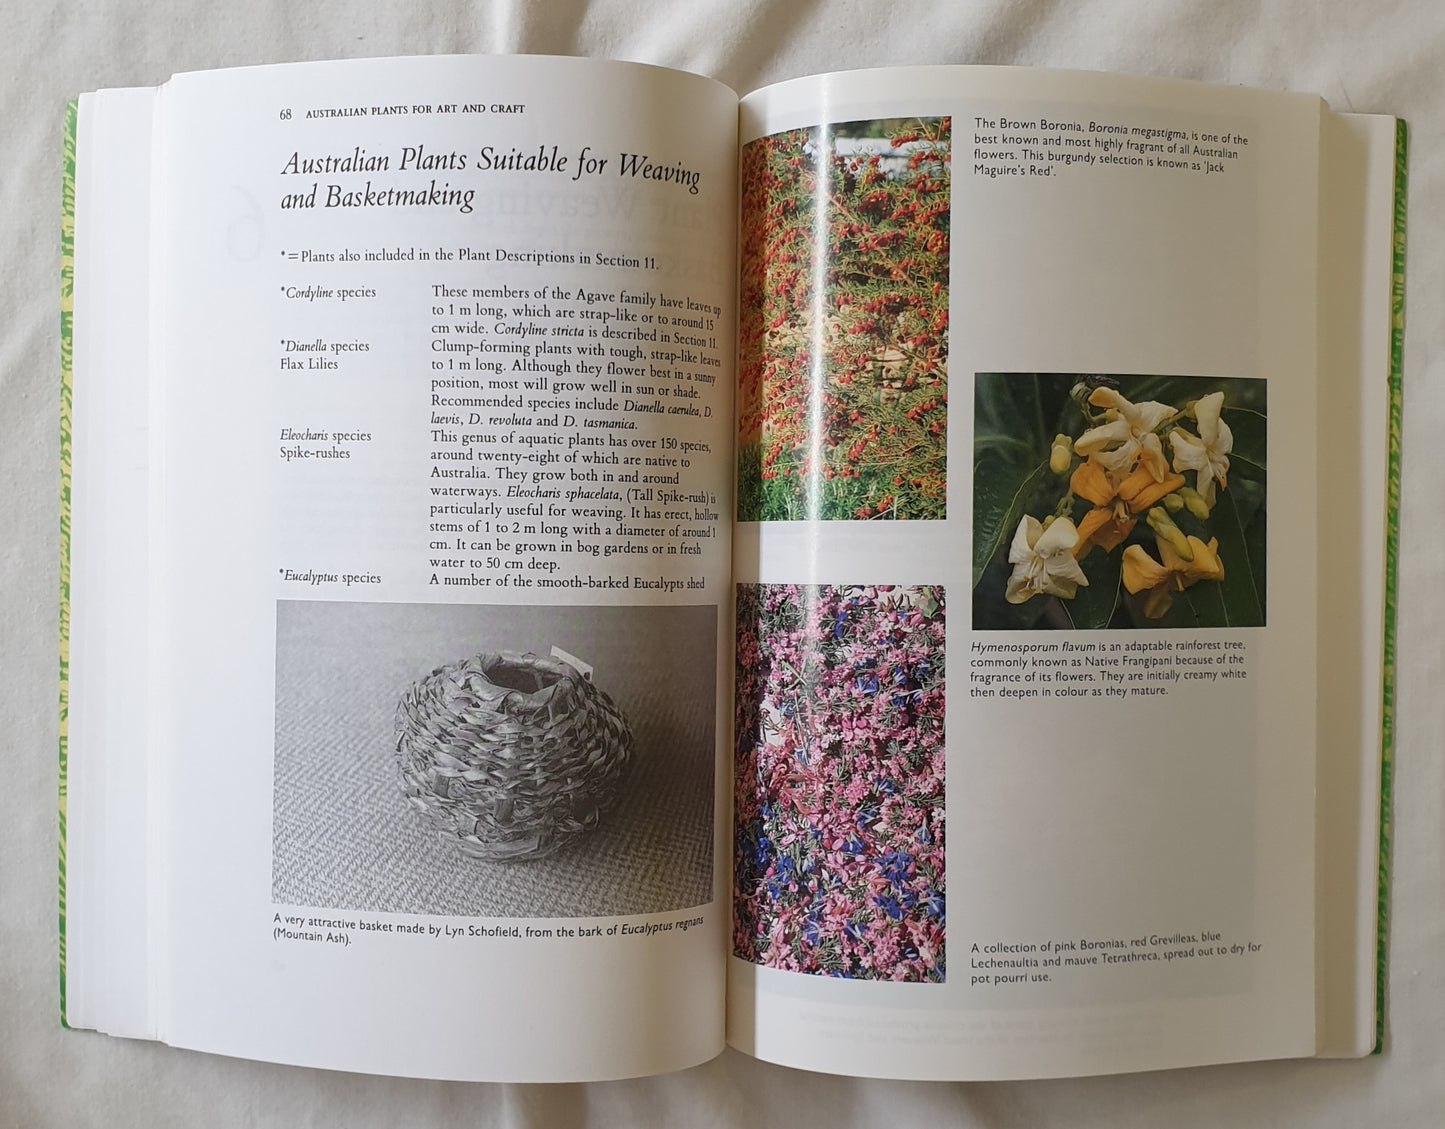 Australian Plants for Art and Craft by Gwen Elliot